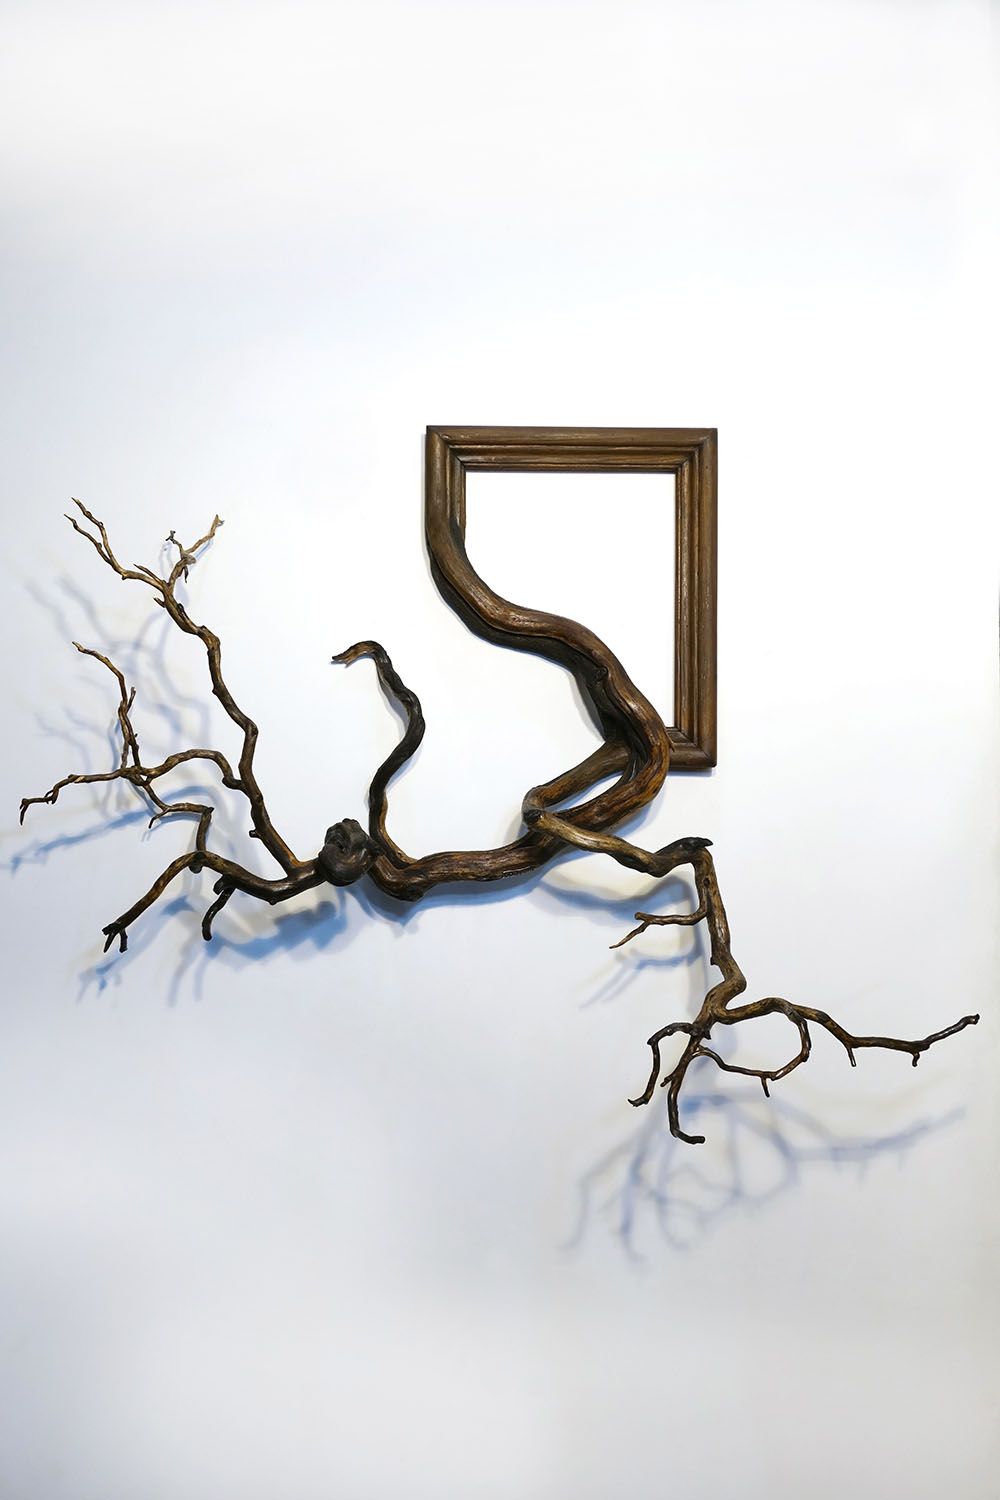 Tree Roots And Branches Fused With Ornate Picture Frames By Darryl Cox 15